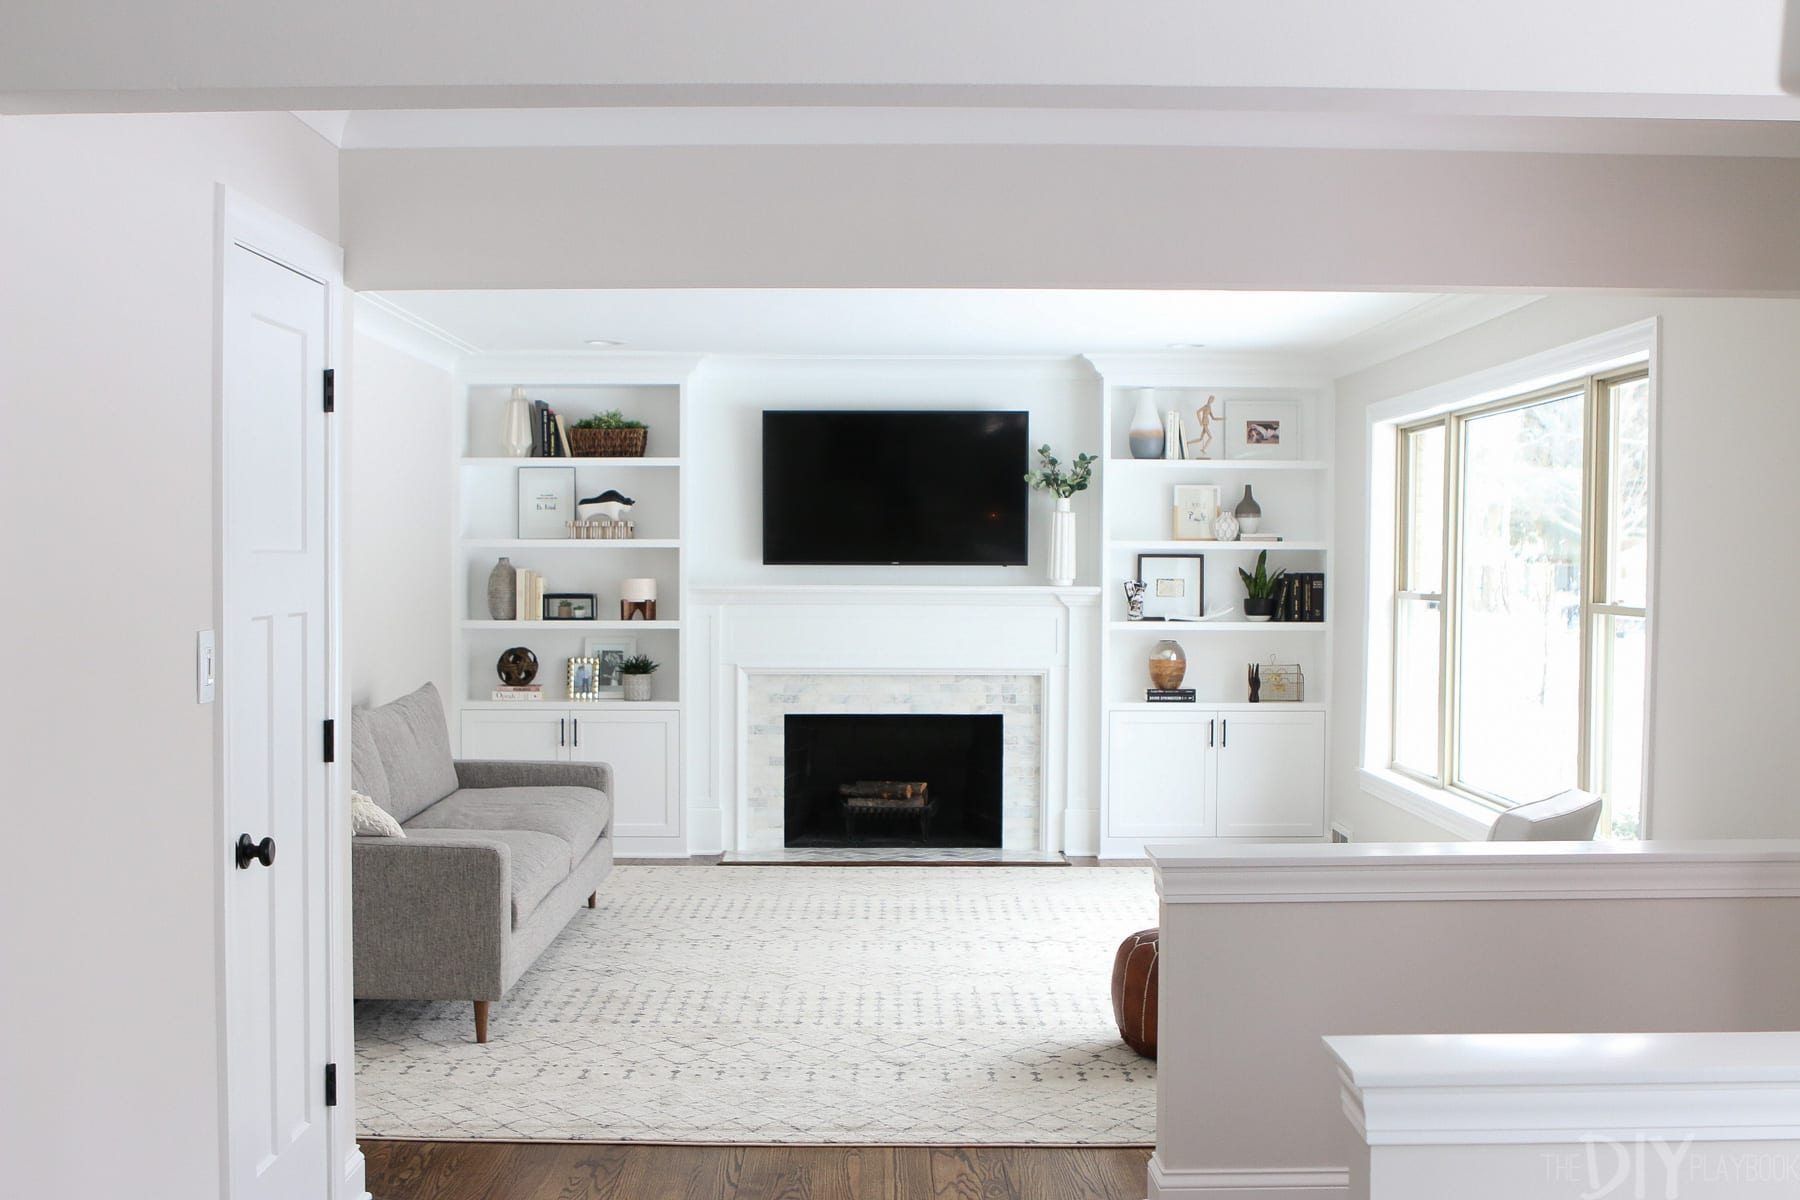 White Built Ins Around The Fireplace, Built In Fireplace Wall